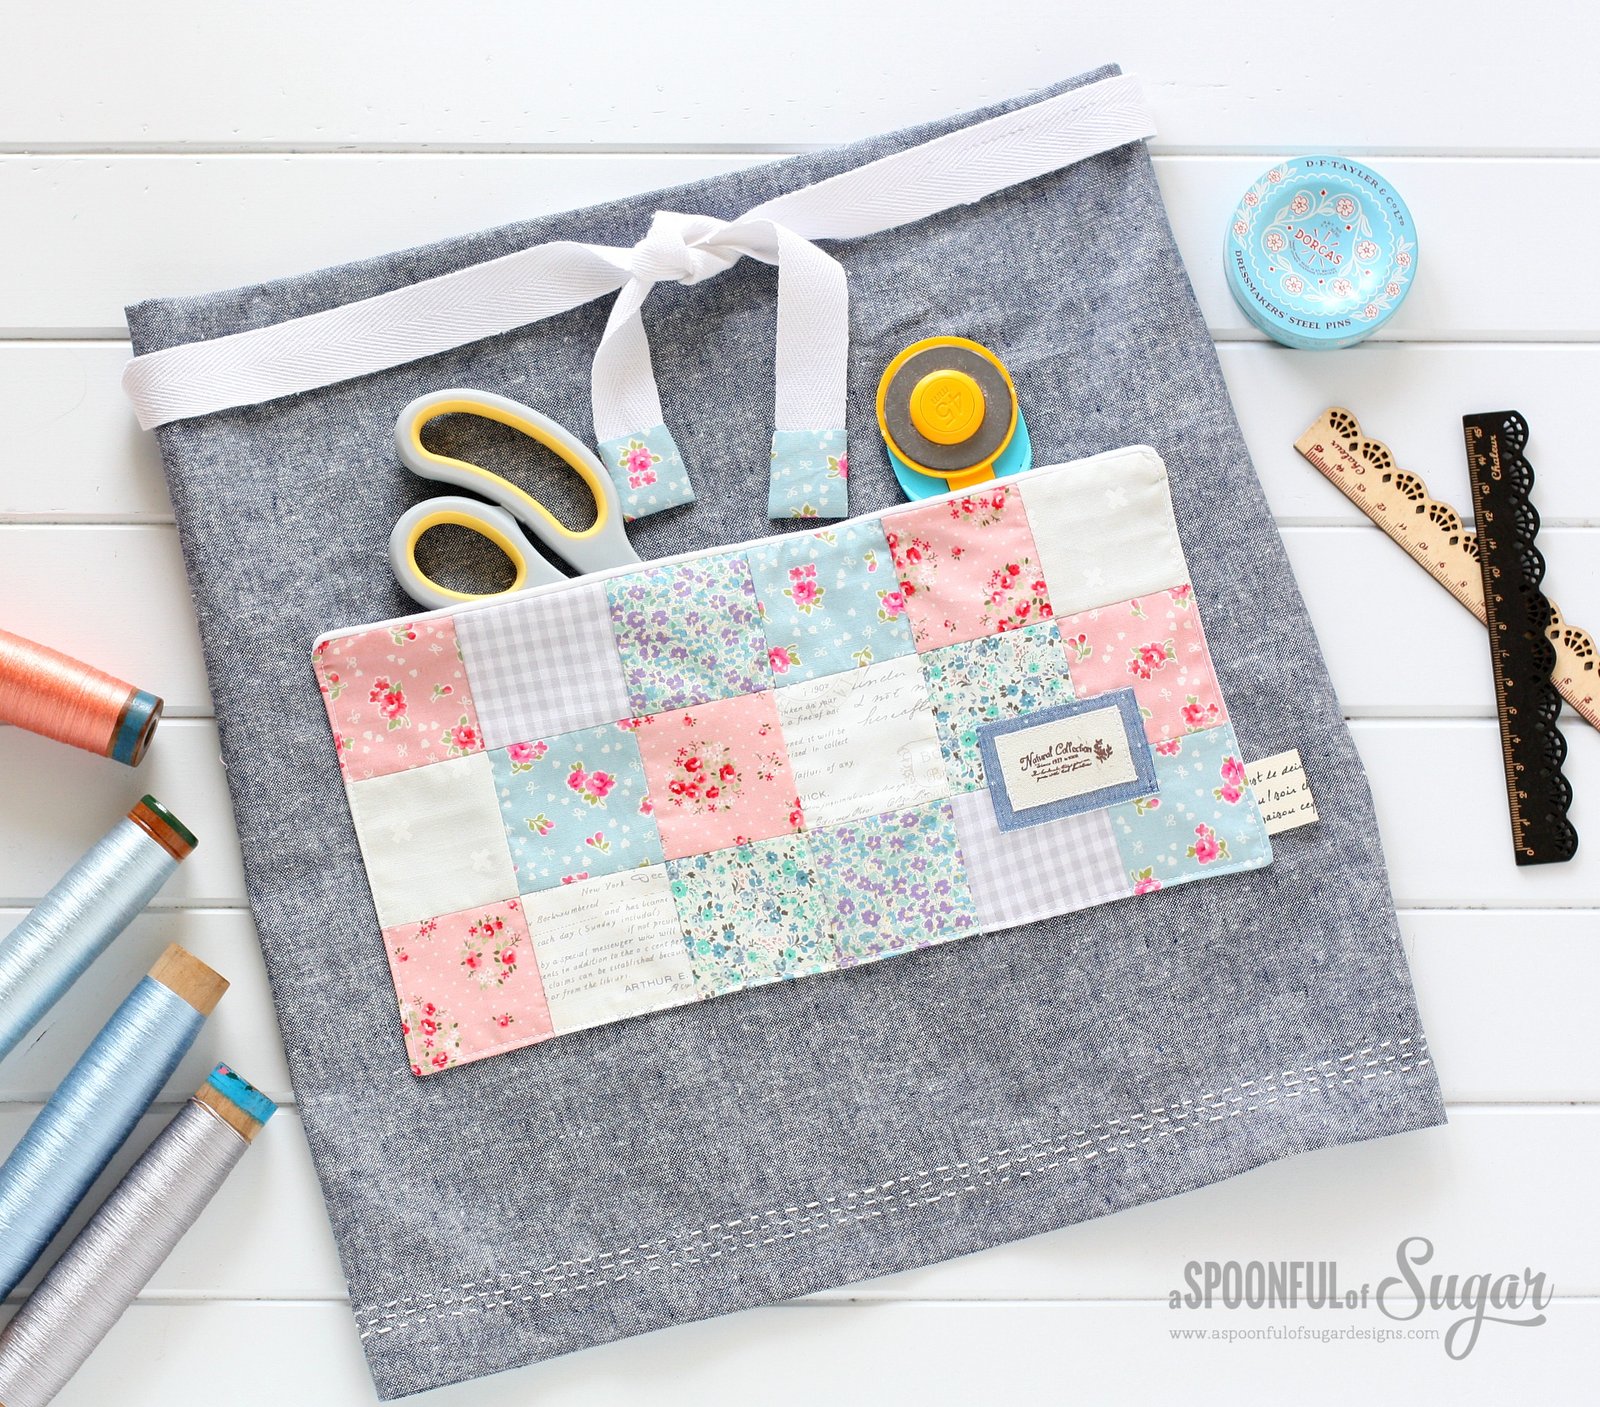 Denim Cafe Apron from A Spoonful of Sugar (book)